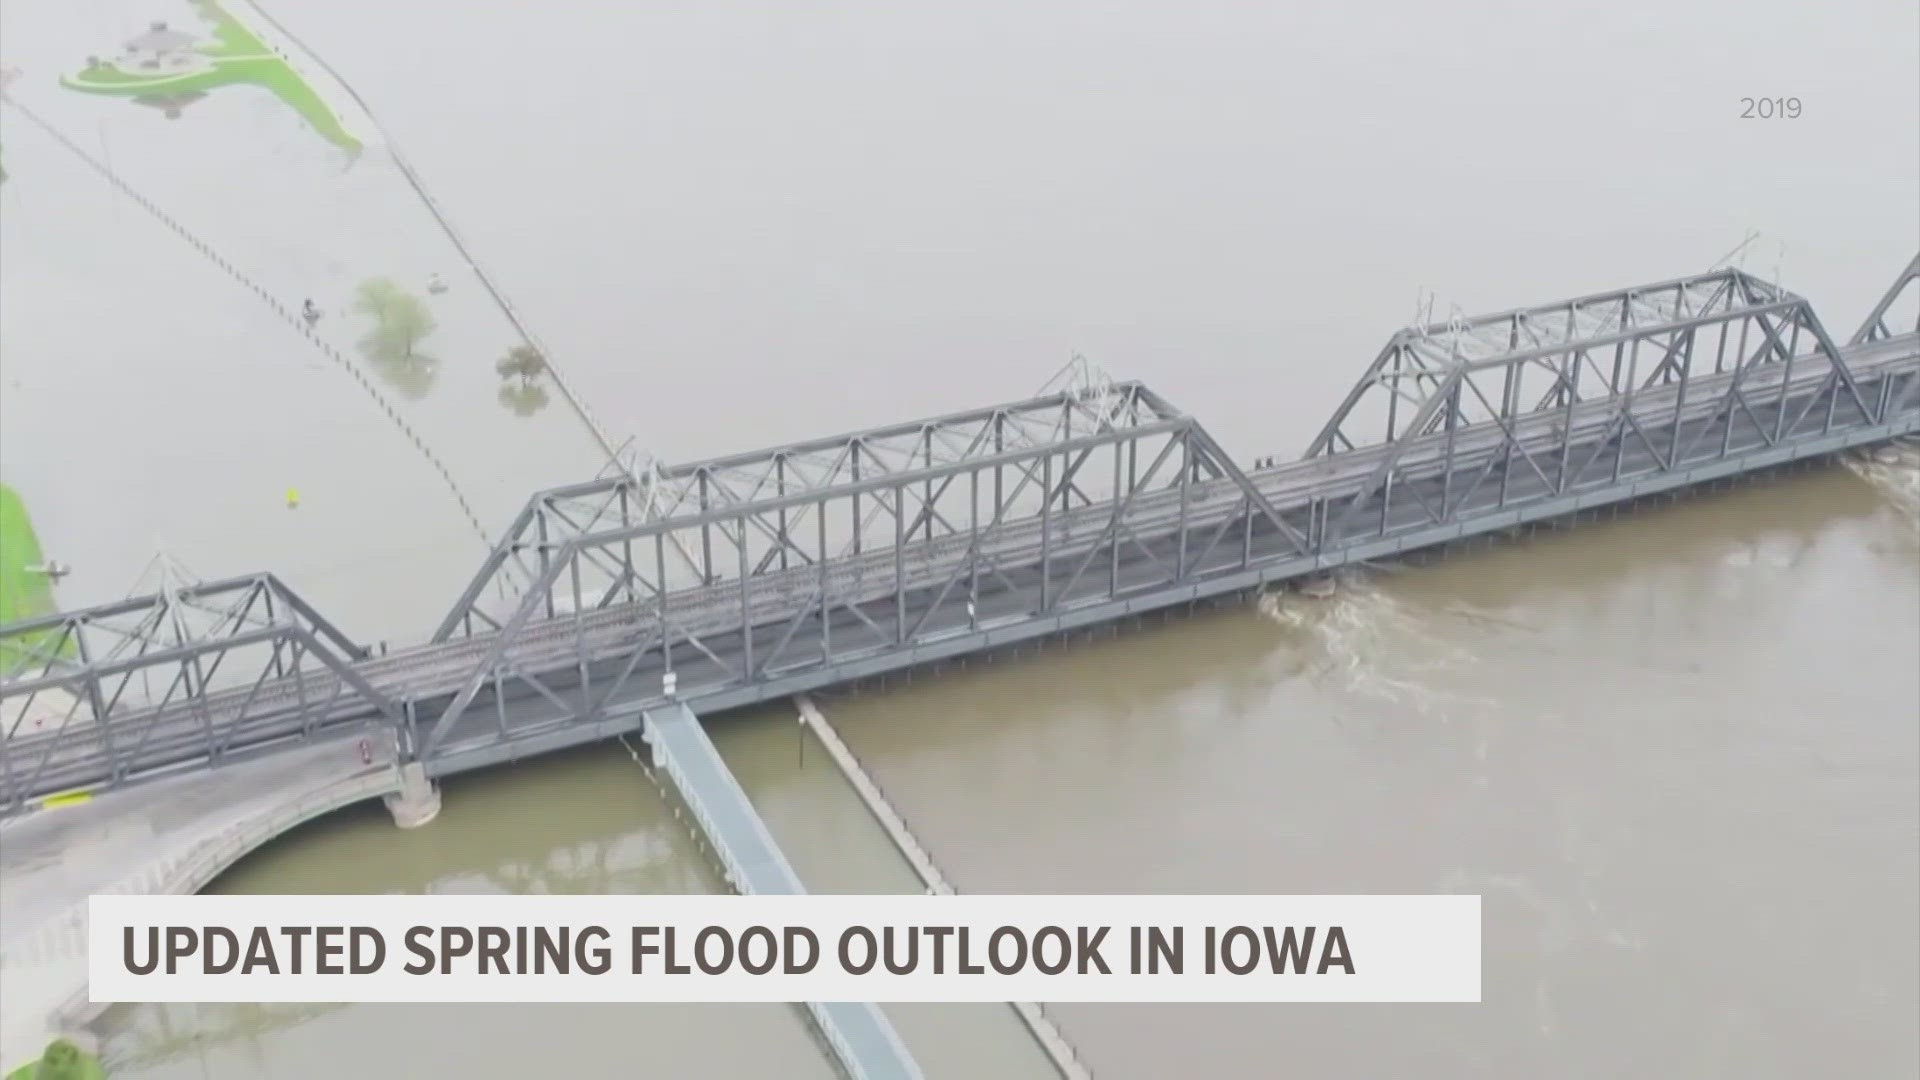 According to the National Weather Service, "Flooding along the Mississippi River has the potential to be similar to what happened in 2019."